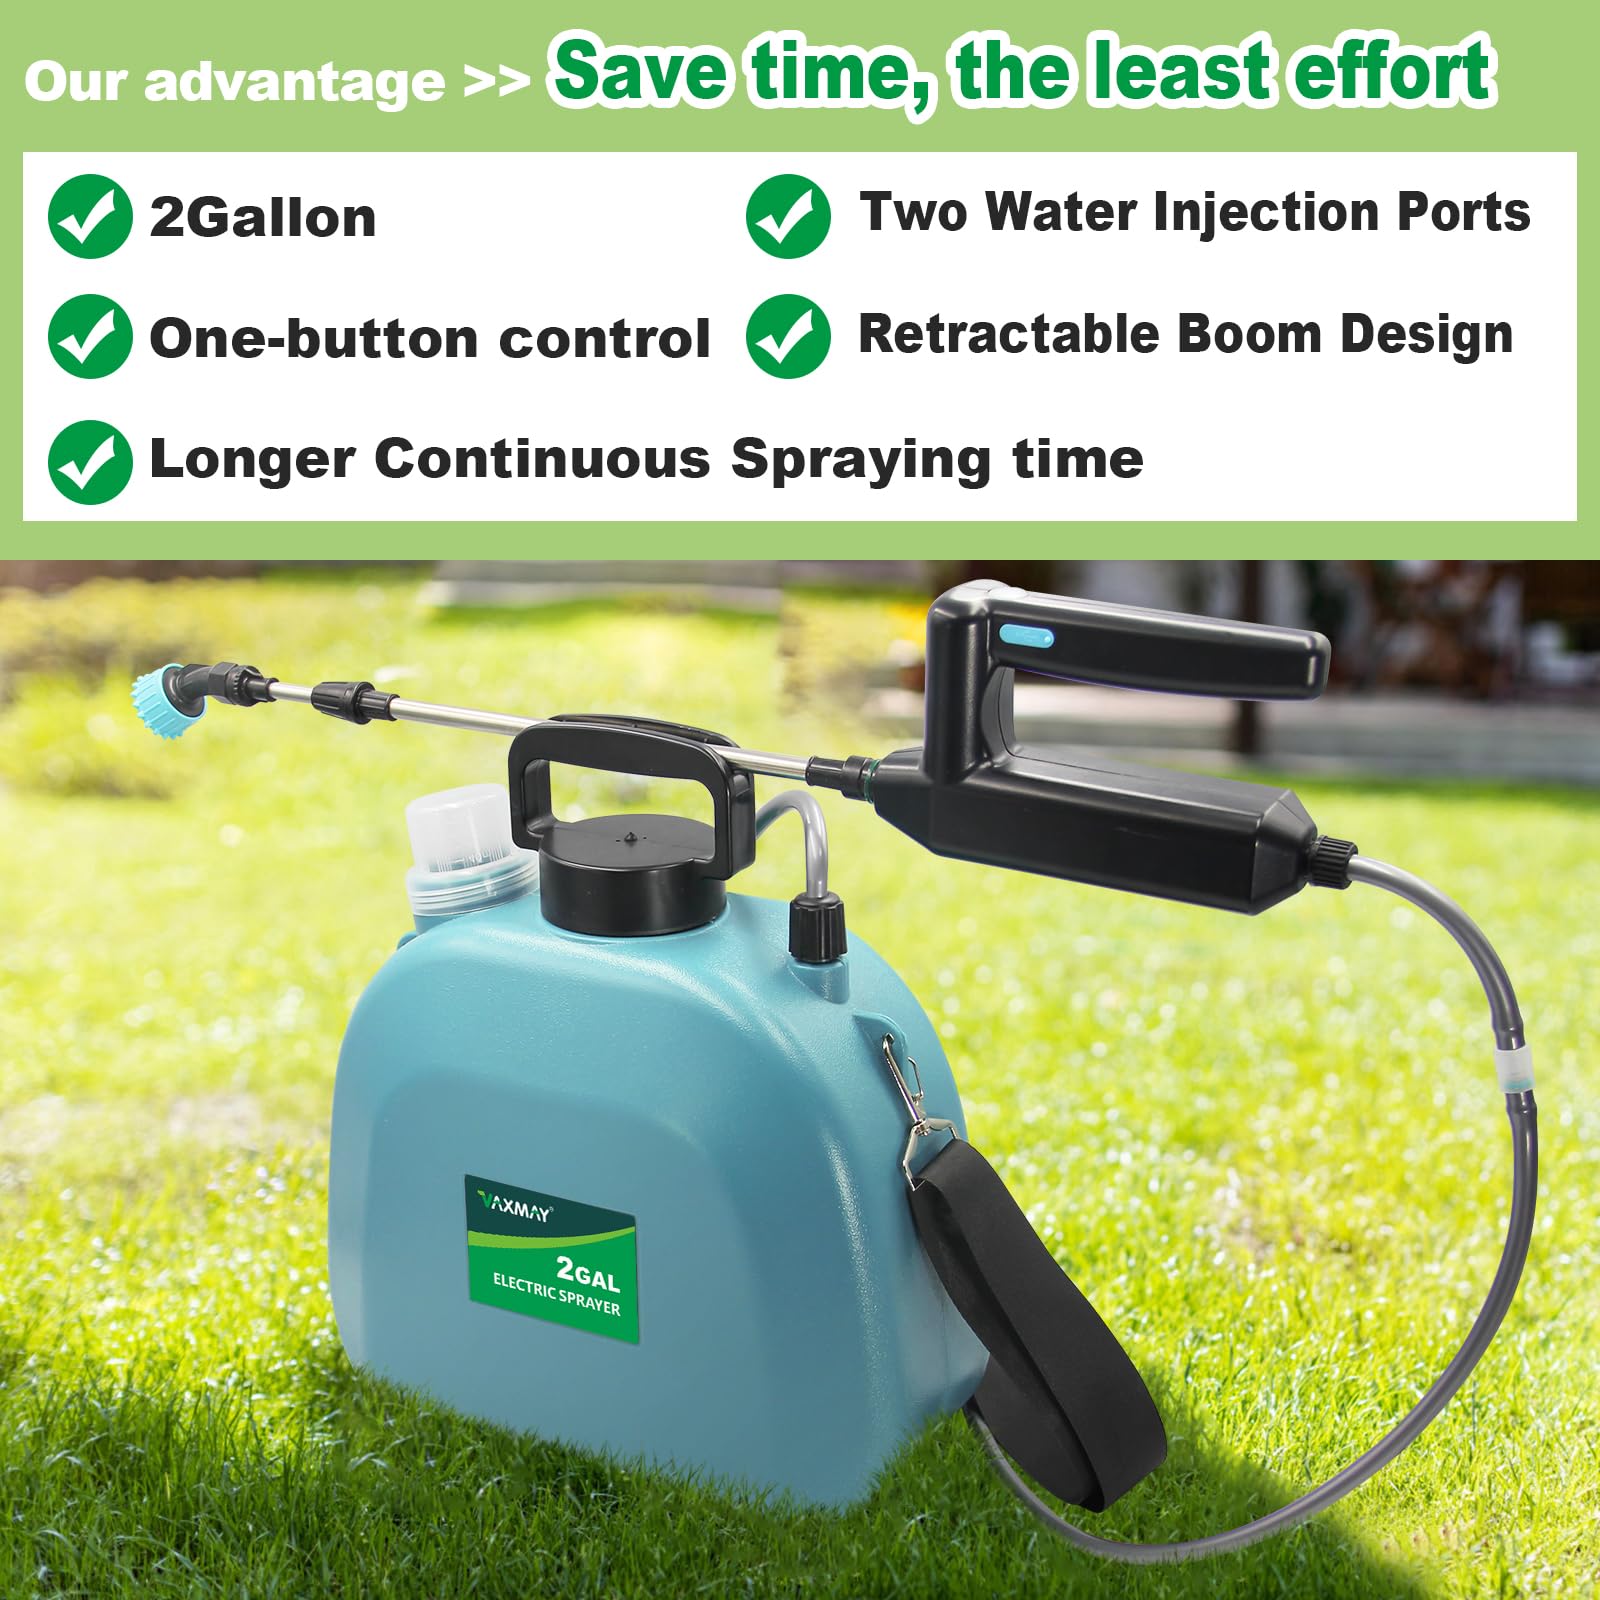 Battery Powered Sprayer 2 Gallon, Upgrade Powerful Electric Sprayer with 3 Mist Nozzles, Rechargeable Handle, Retractable Wand, Garden Sprayer with Adjustable Shoulder Strap for Lawn,Garden,Cleaning